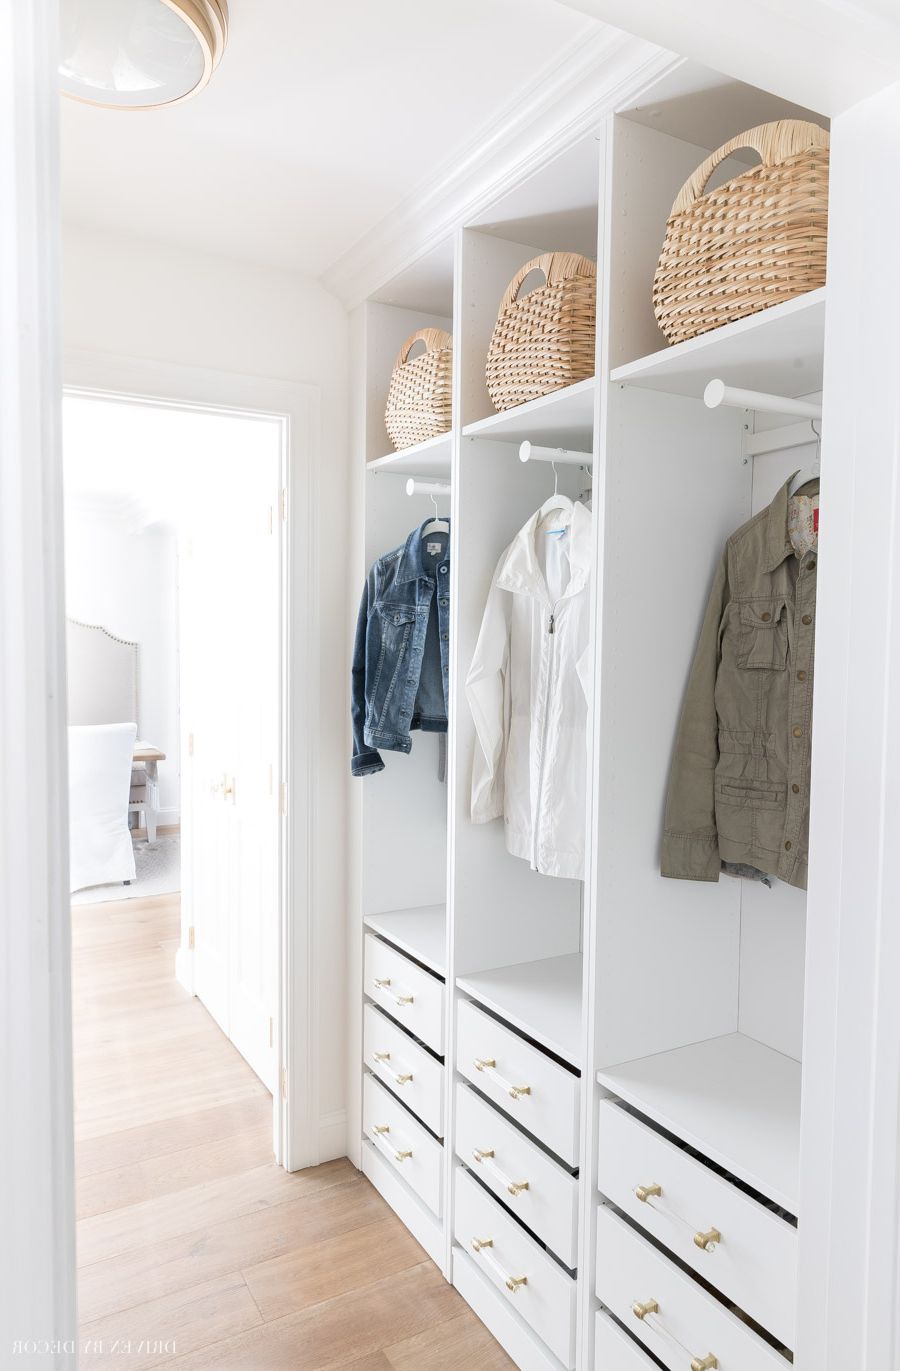 Our Ikea Mudroom Using Pax Wardrobes – Drivendecor Throughout Wardrobes Drawers And Shelves Ikea (View 14 of 20)